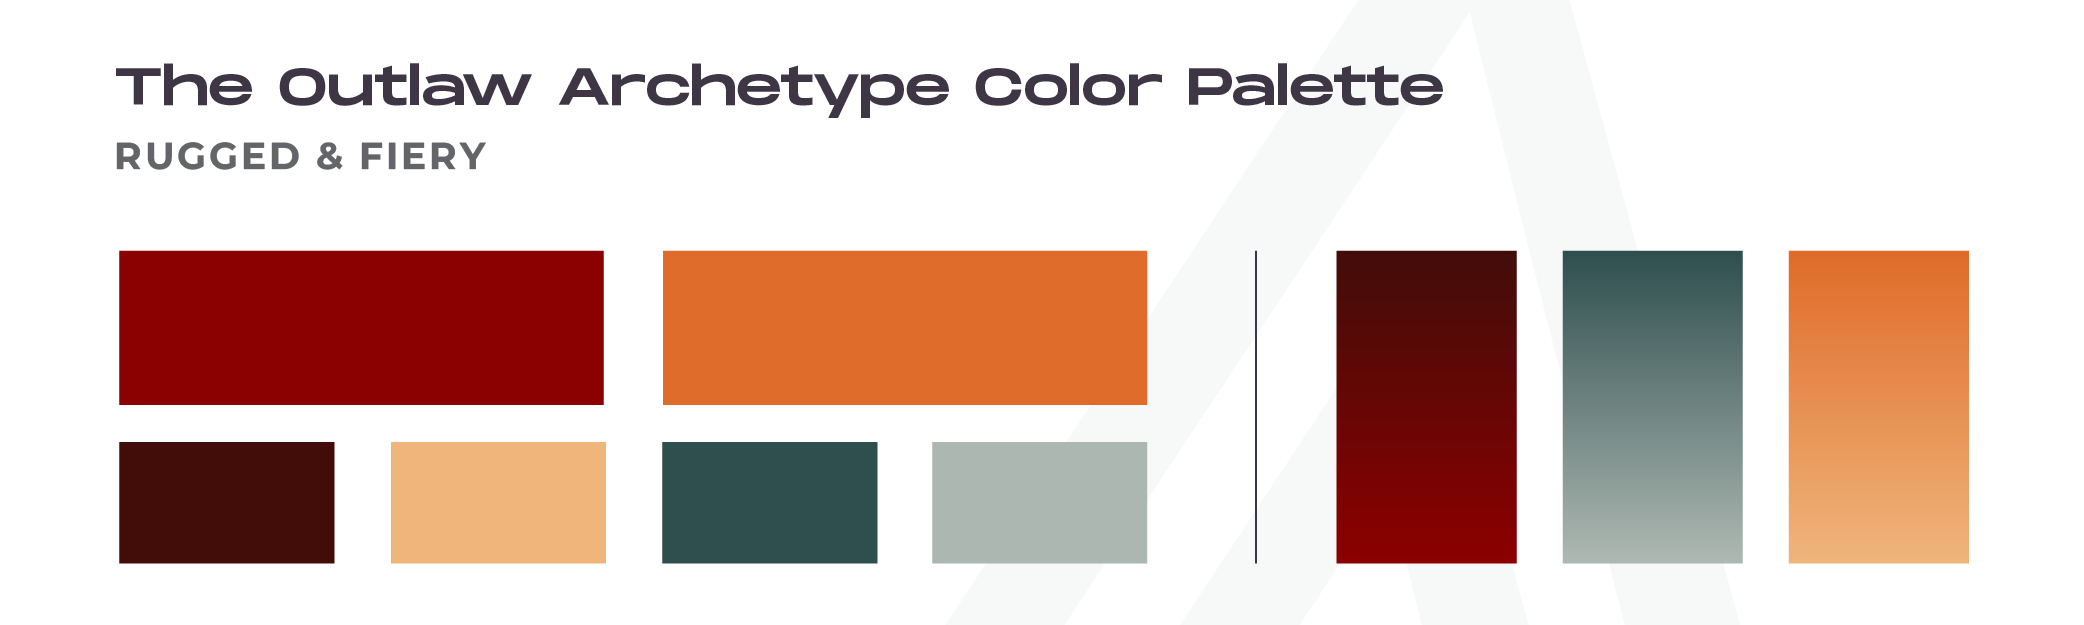 Brand Archetypes Color Palettes_The Outlaw